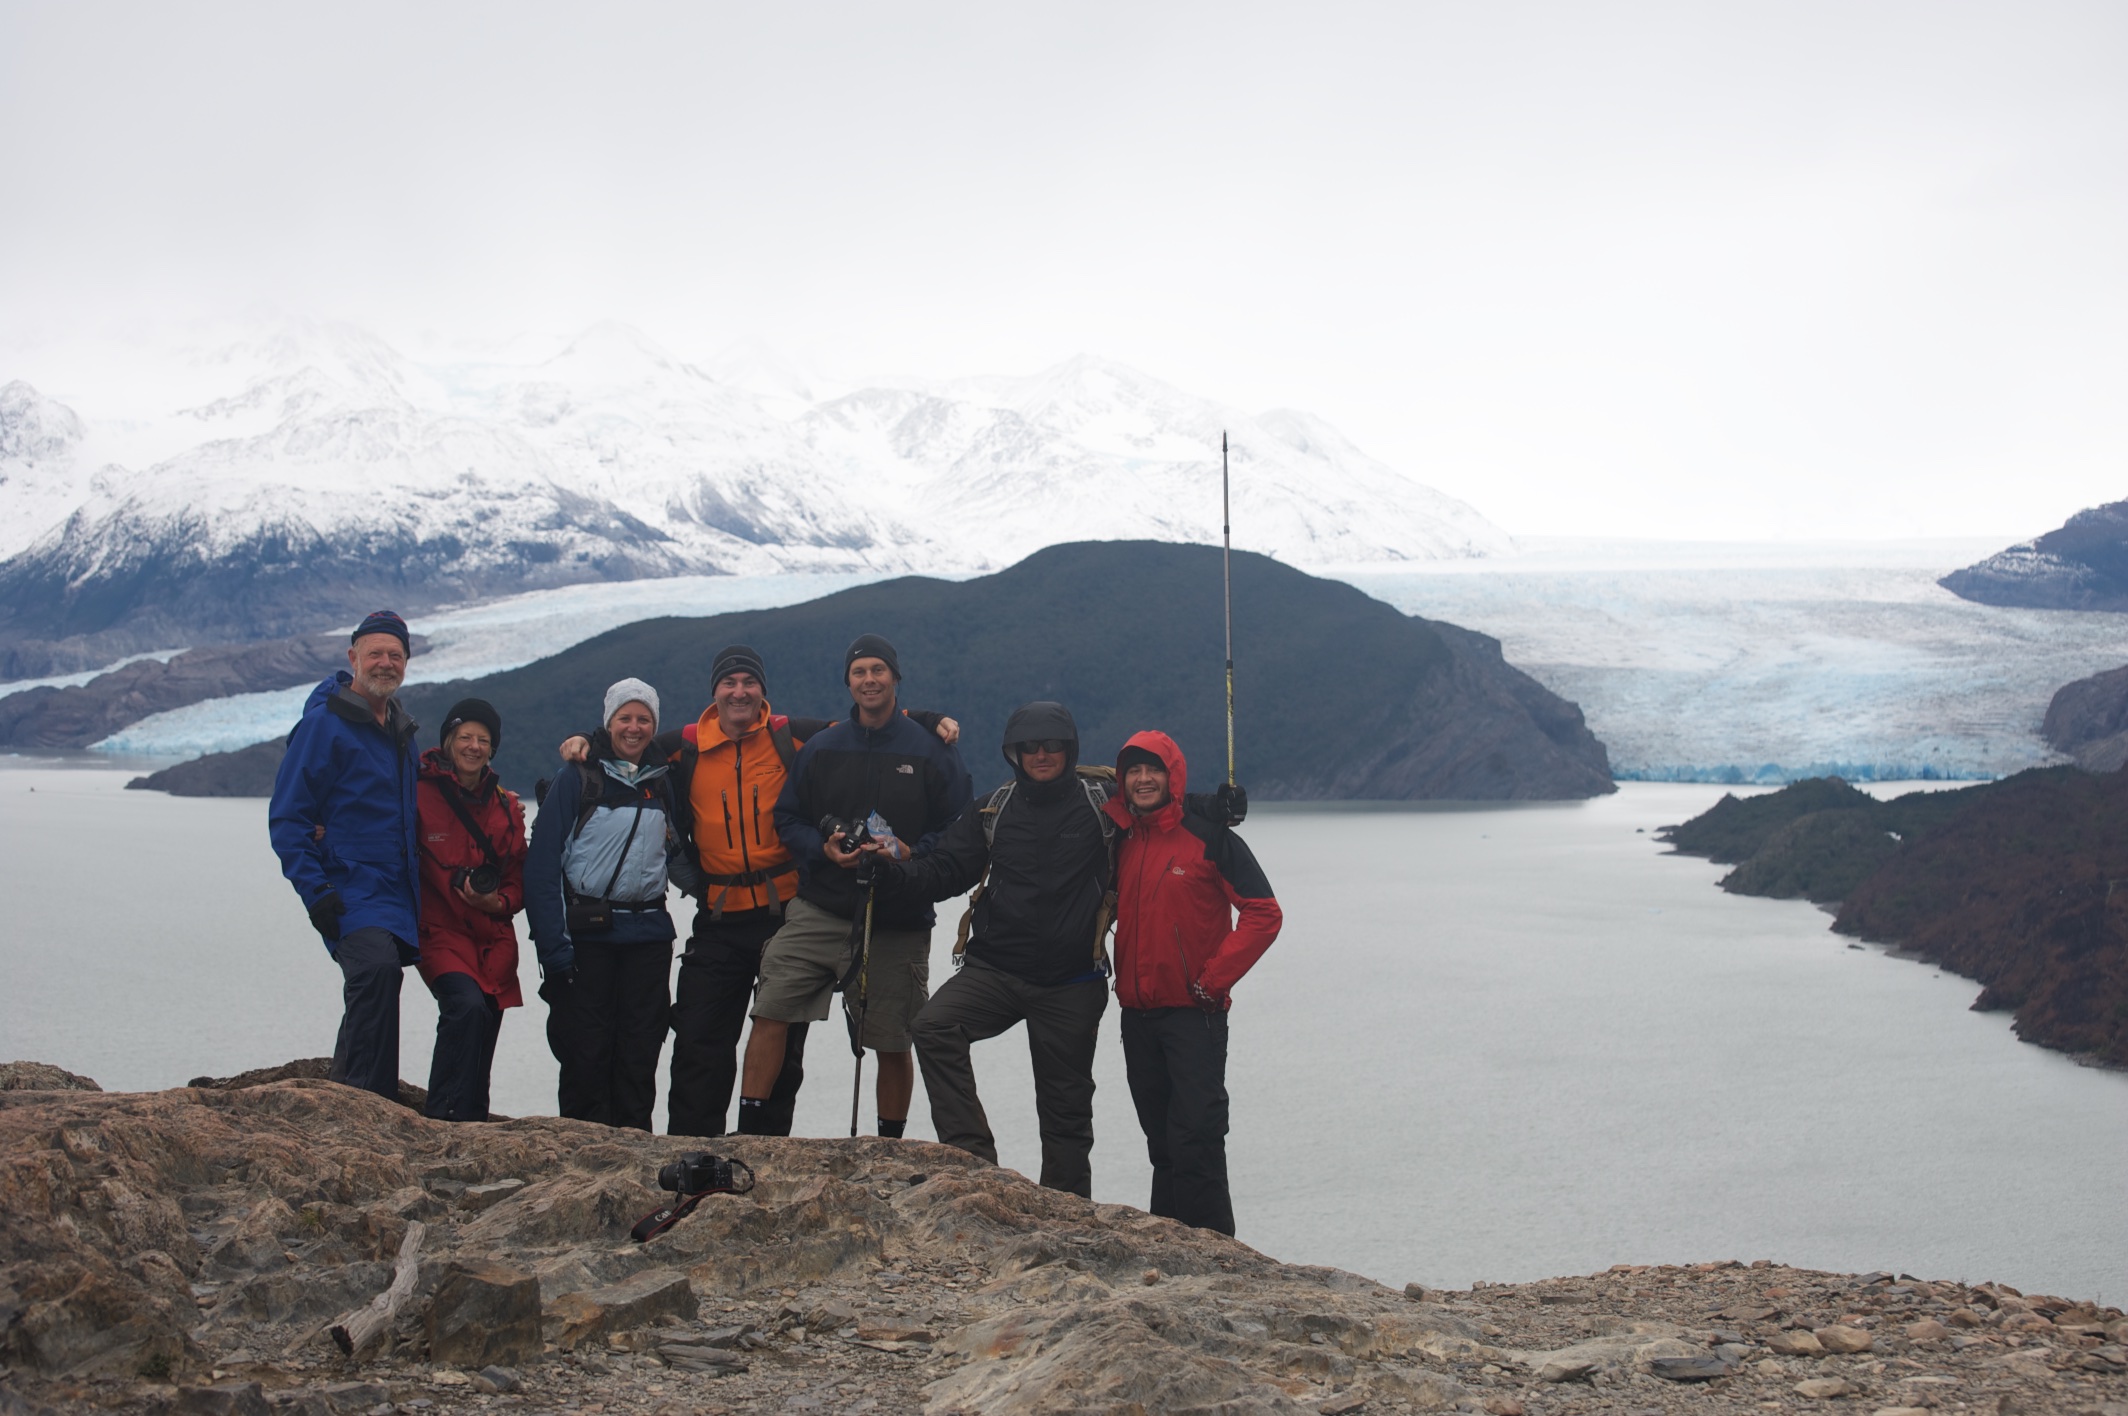  Our tour group at Grey Glacier, Torres del Paine, Patagonia, Chile 